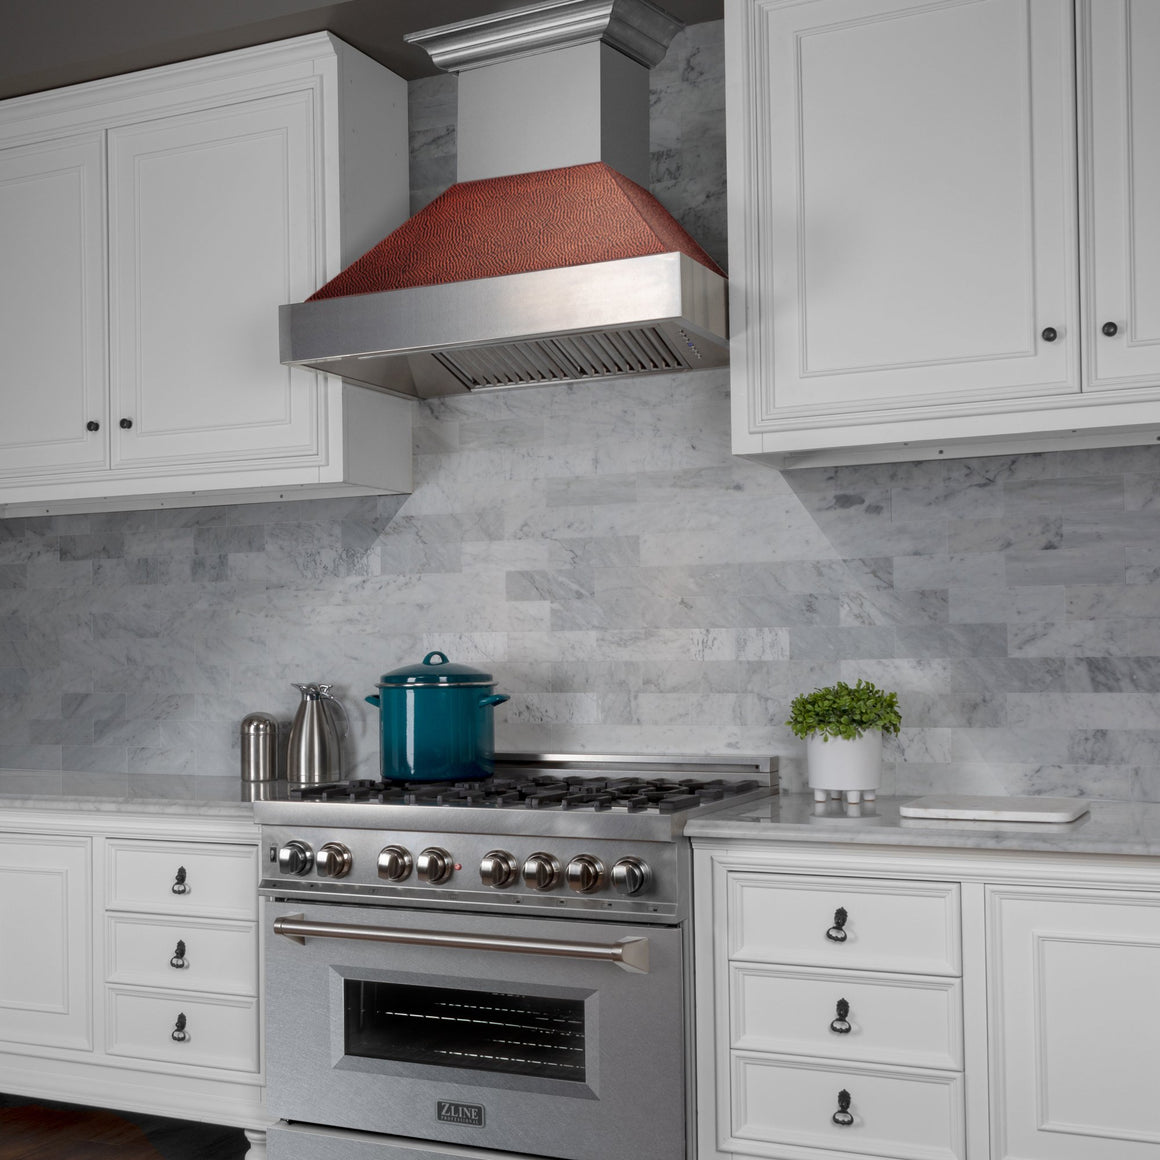 30" ZLINE Ducted DuraSnow® Stainless Steel Range Hood with Hand-Hammered Copper Shell (8654HH)